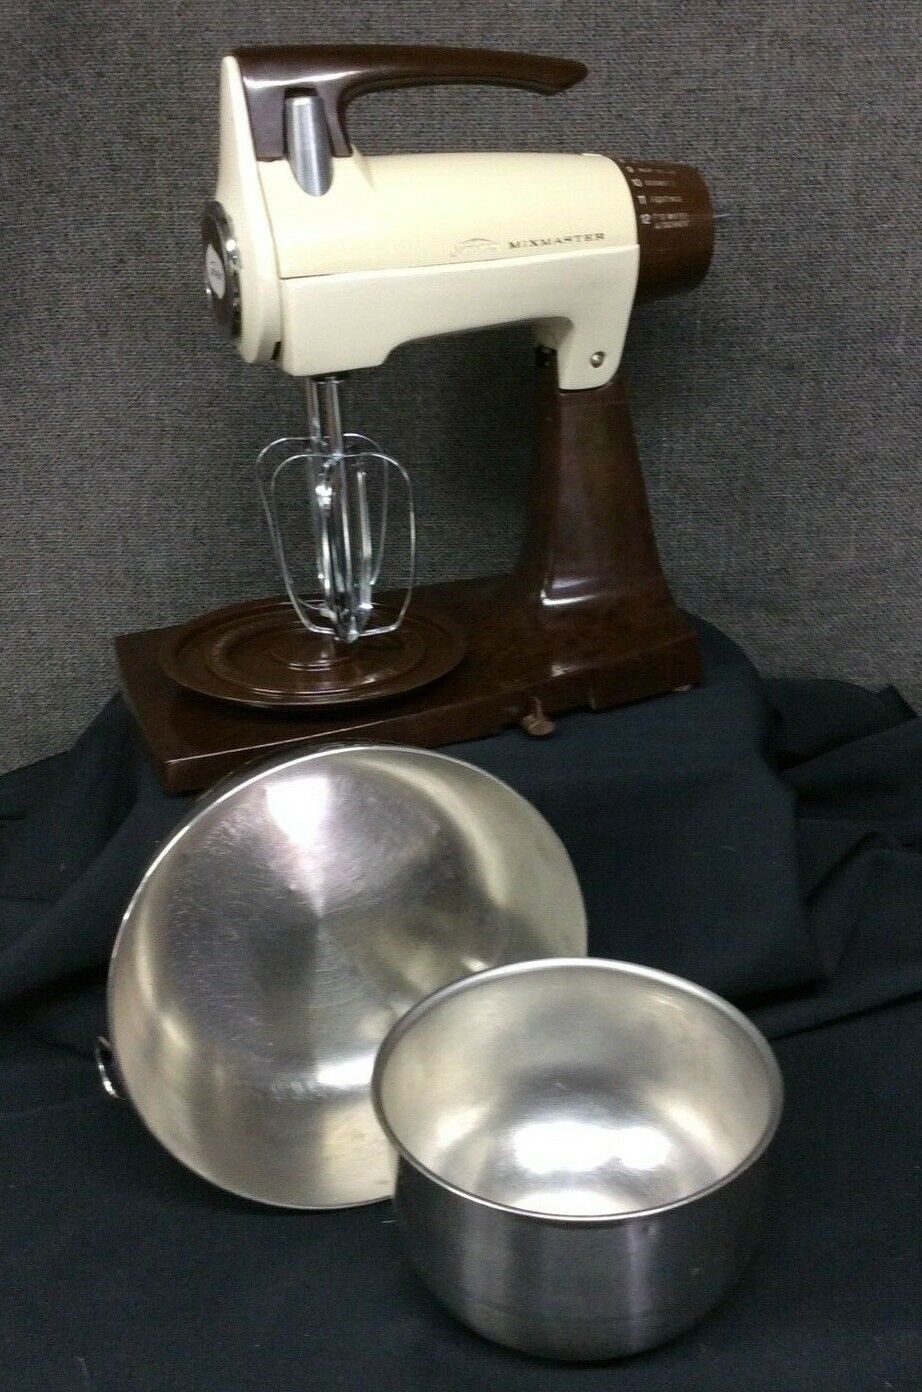 Vintage Sunbeam Mixmaster Power Plus 12 Speed Mixer With Small